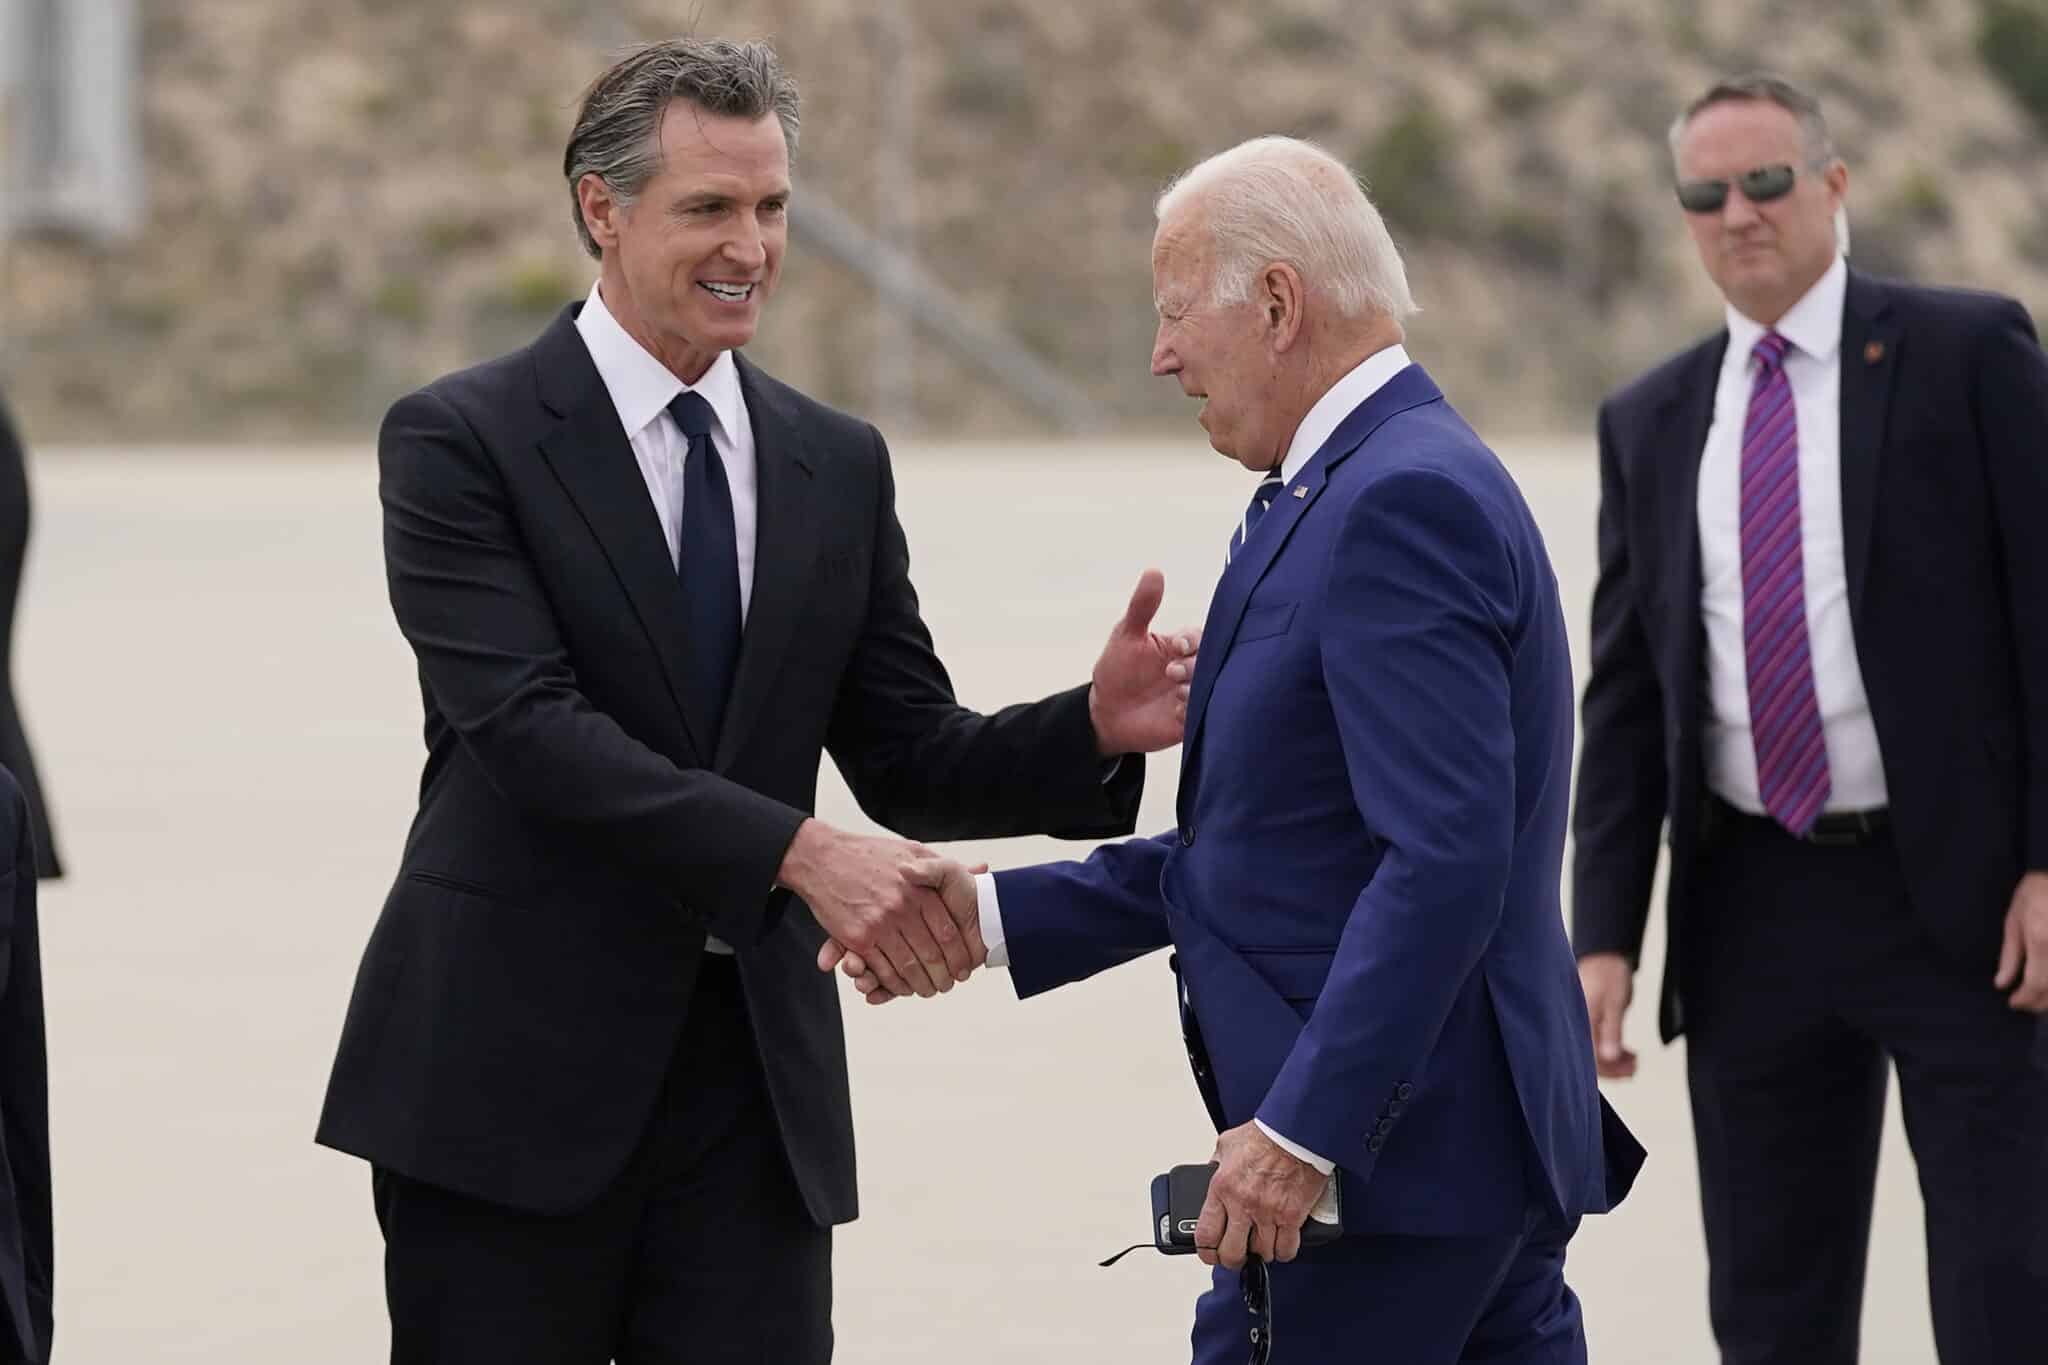 President Joe Biden, right, greets California Gov. Gavin Newsom after arriving at Los Angeles International Airport to attend the Summit of the Americas, Wednesday, June 8, 2022, in Los Angeles. (AP Photo/Evan Vucci)